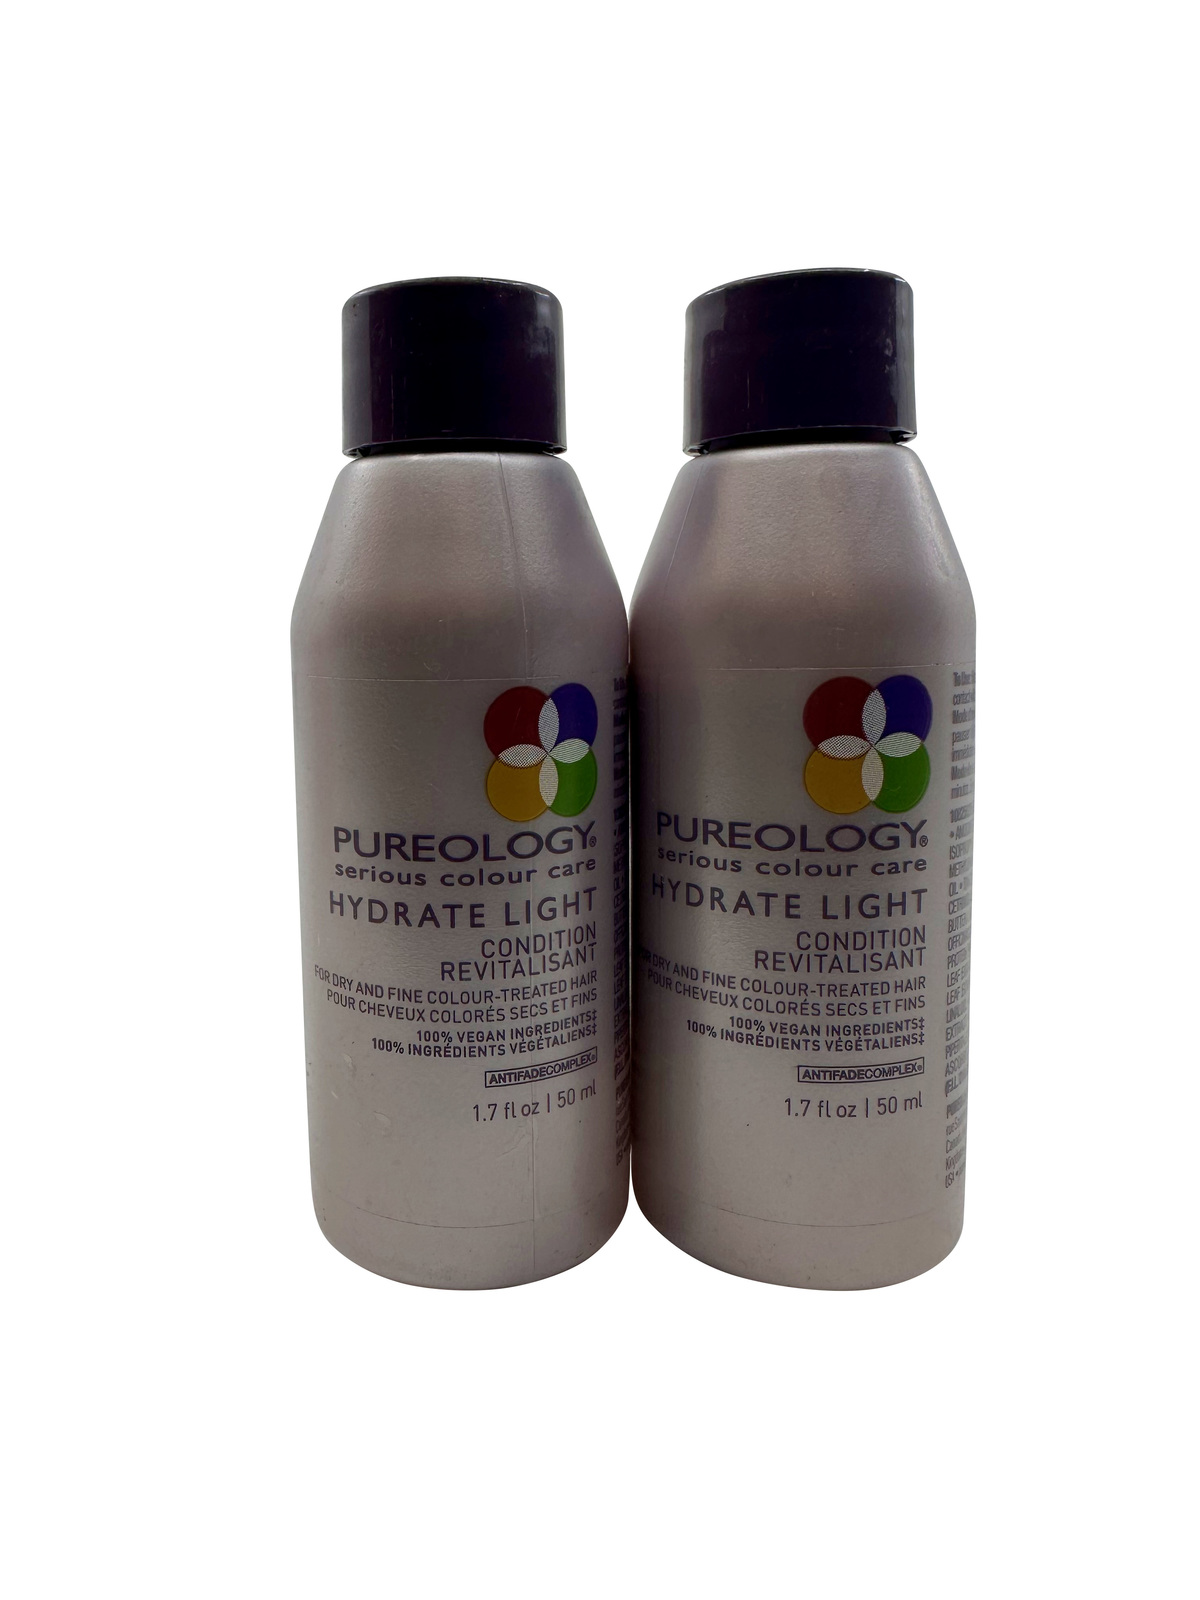 Pureology Hydrate Light Conditioner Dry & Fine Color Treated Hair 1.7 oz. Set of - $15.00